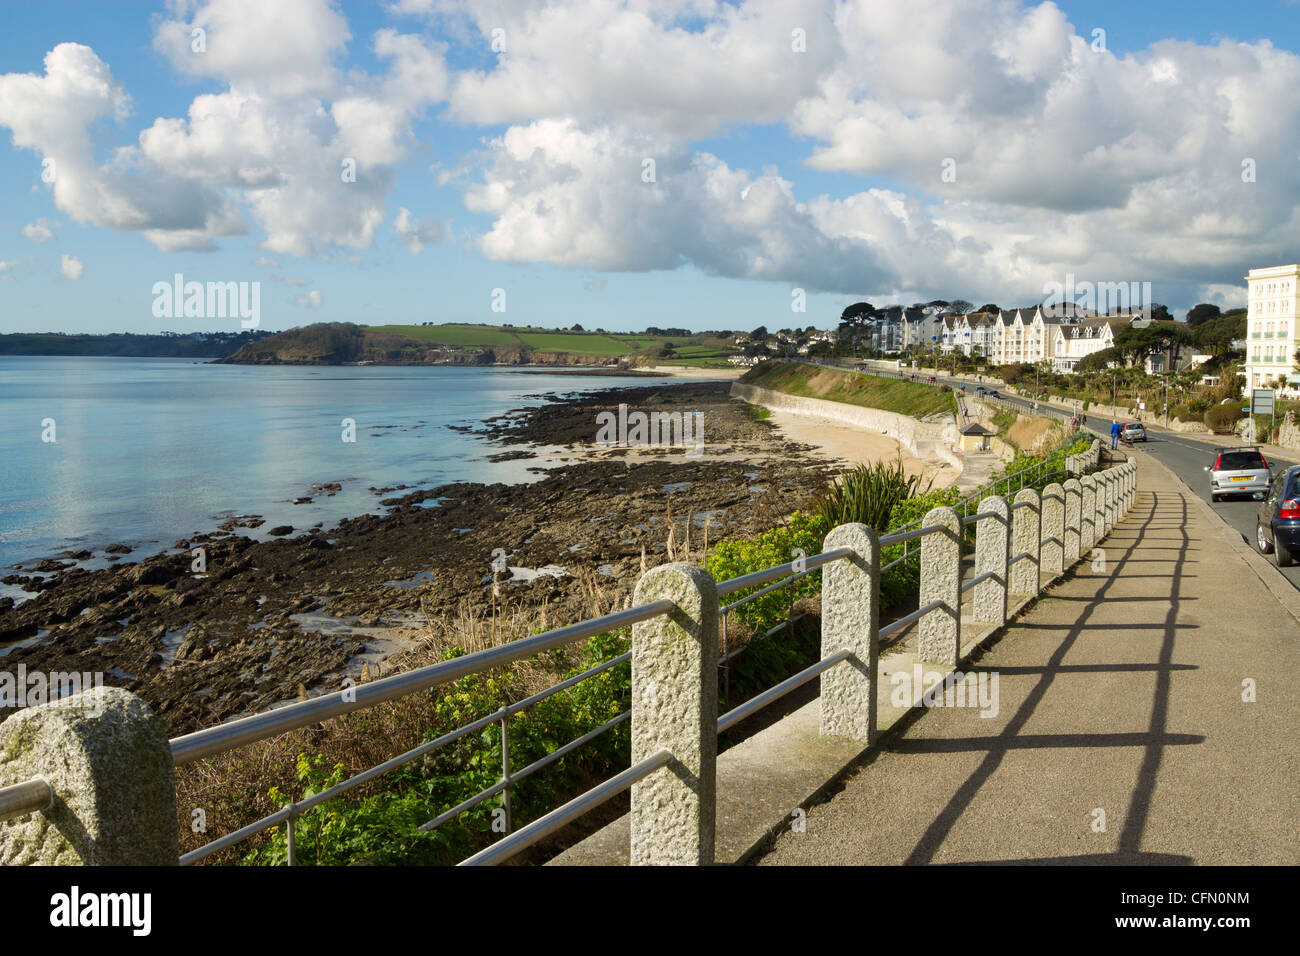 Falmouth Cliff Road Sea front, Cornwall UK. Banque D'Images